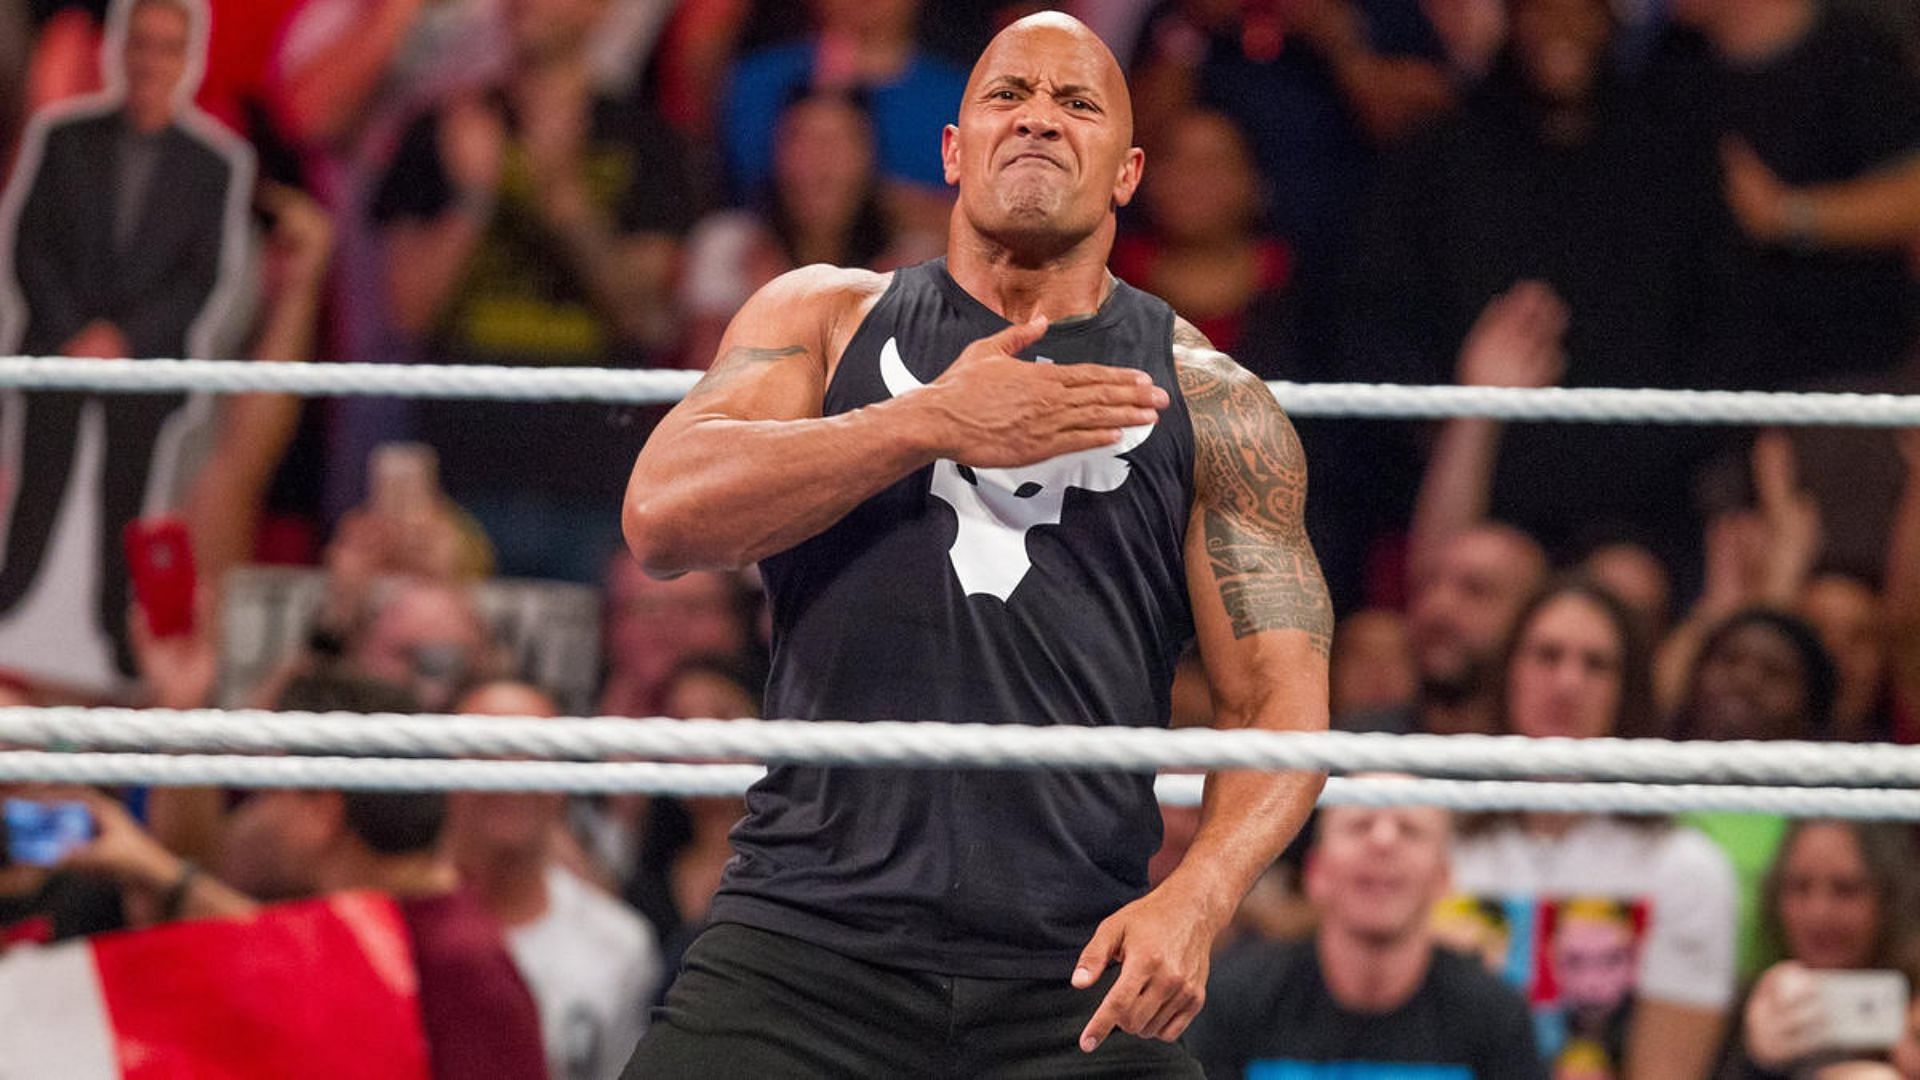 Is The Rock ignoring his family's issues? Fans think so following WWE ...